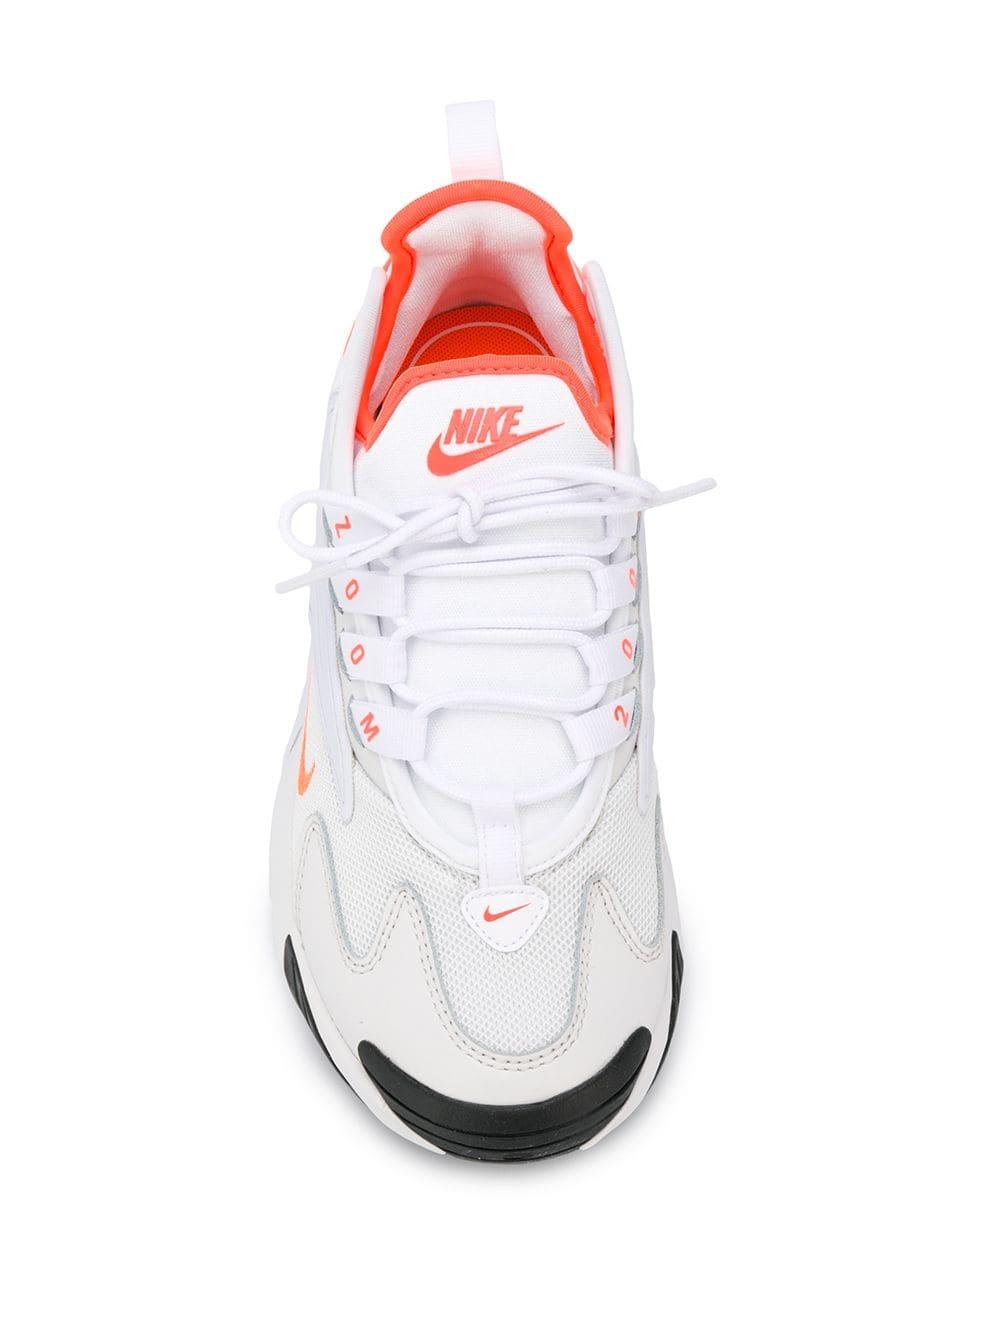 Nike Leather Off-white And Orange Zoom 2k Sneakers | Lyst Australia